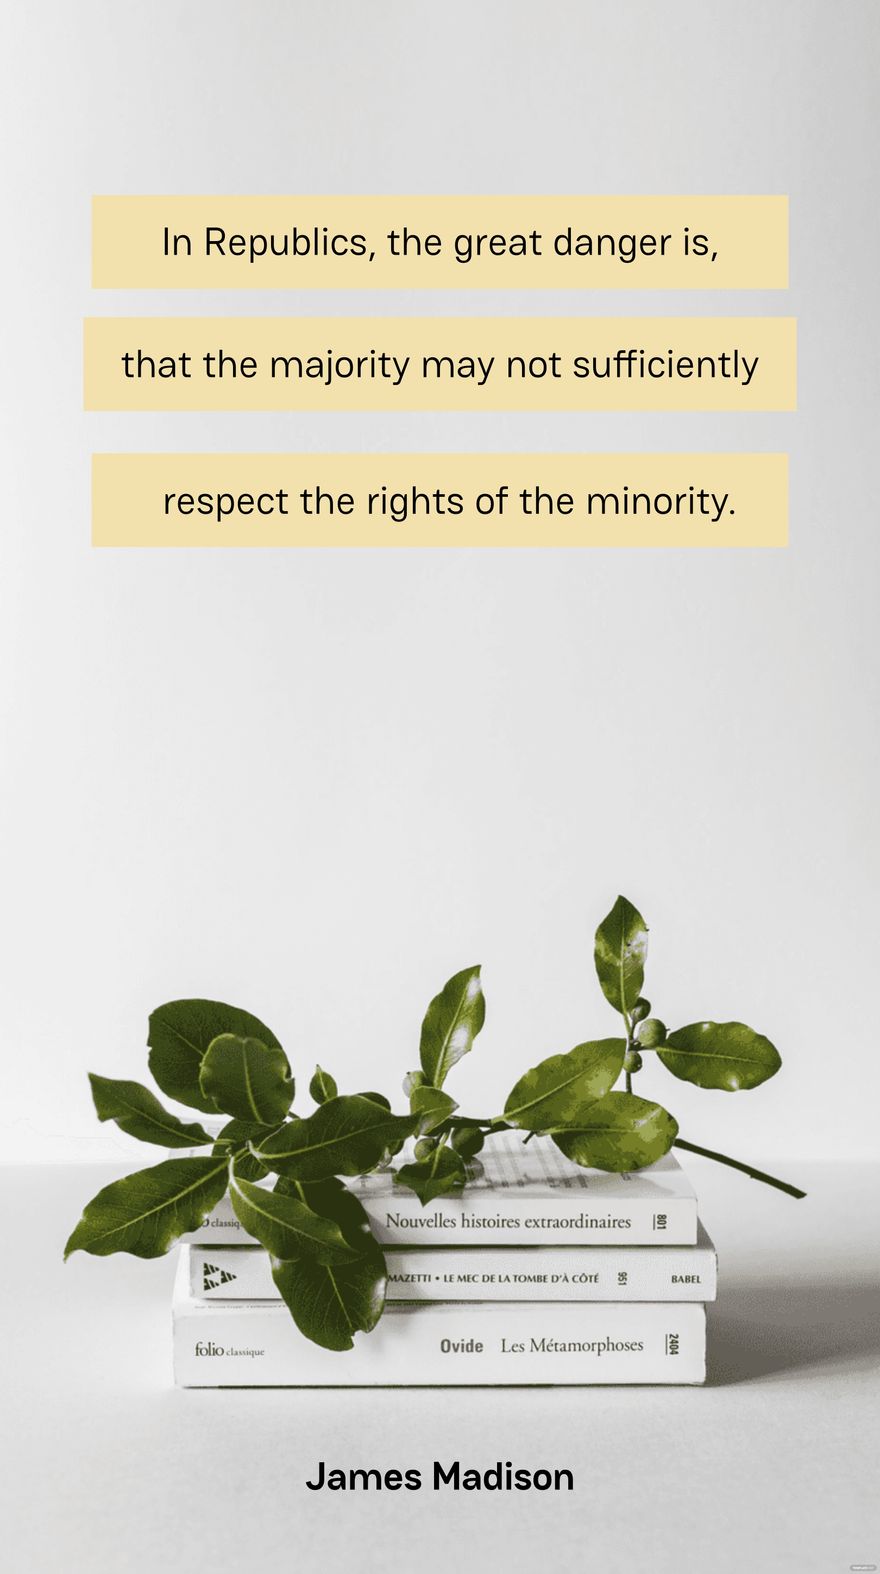 In Republics, the great danger is, that the majority may not sufficiently respect the rights of the minority. - James Madison